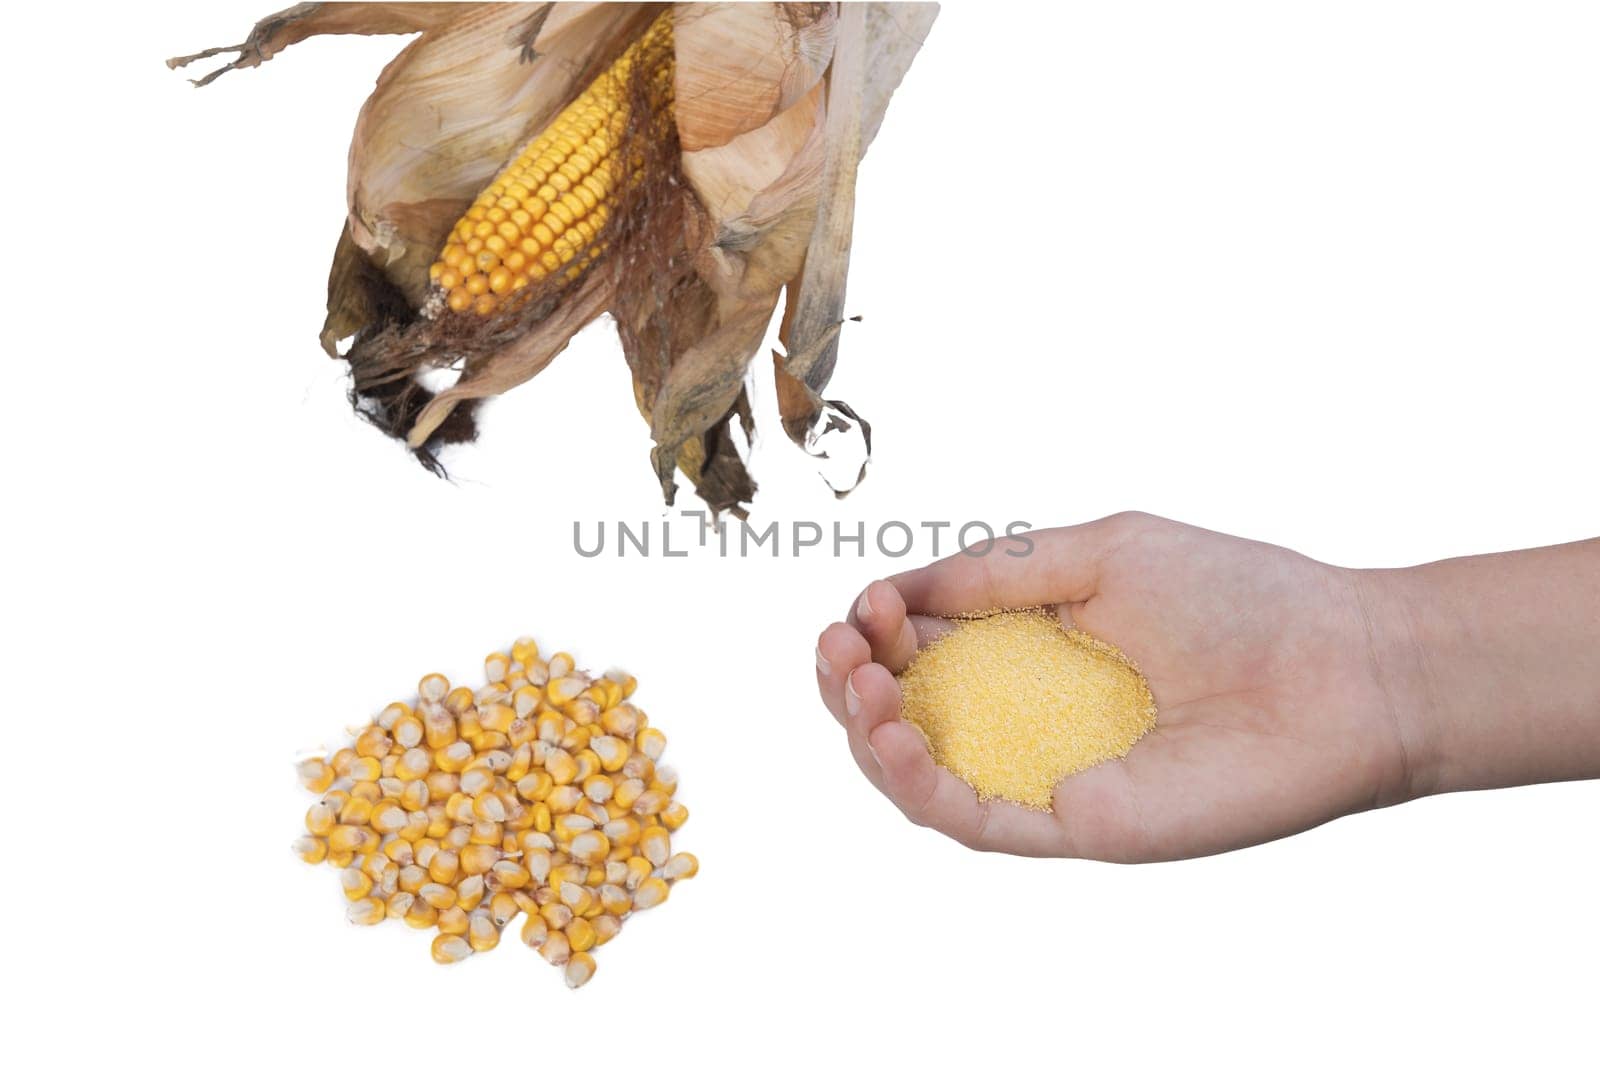 cob with some corn seeds  by sergiodv